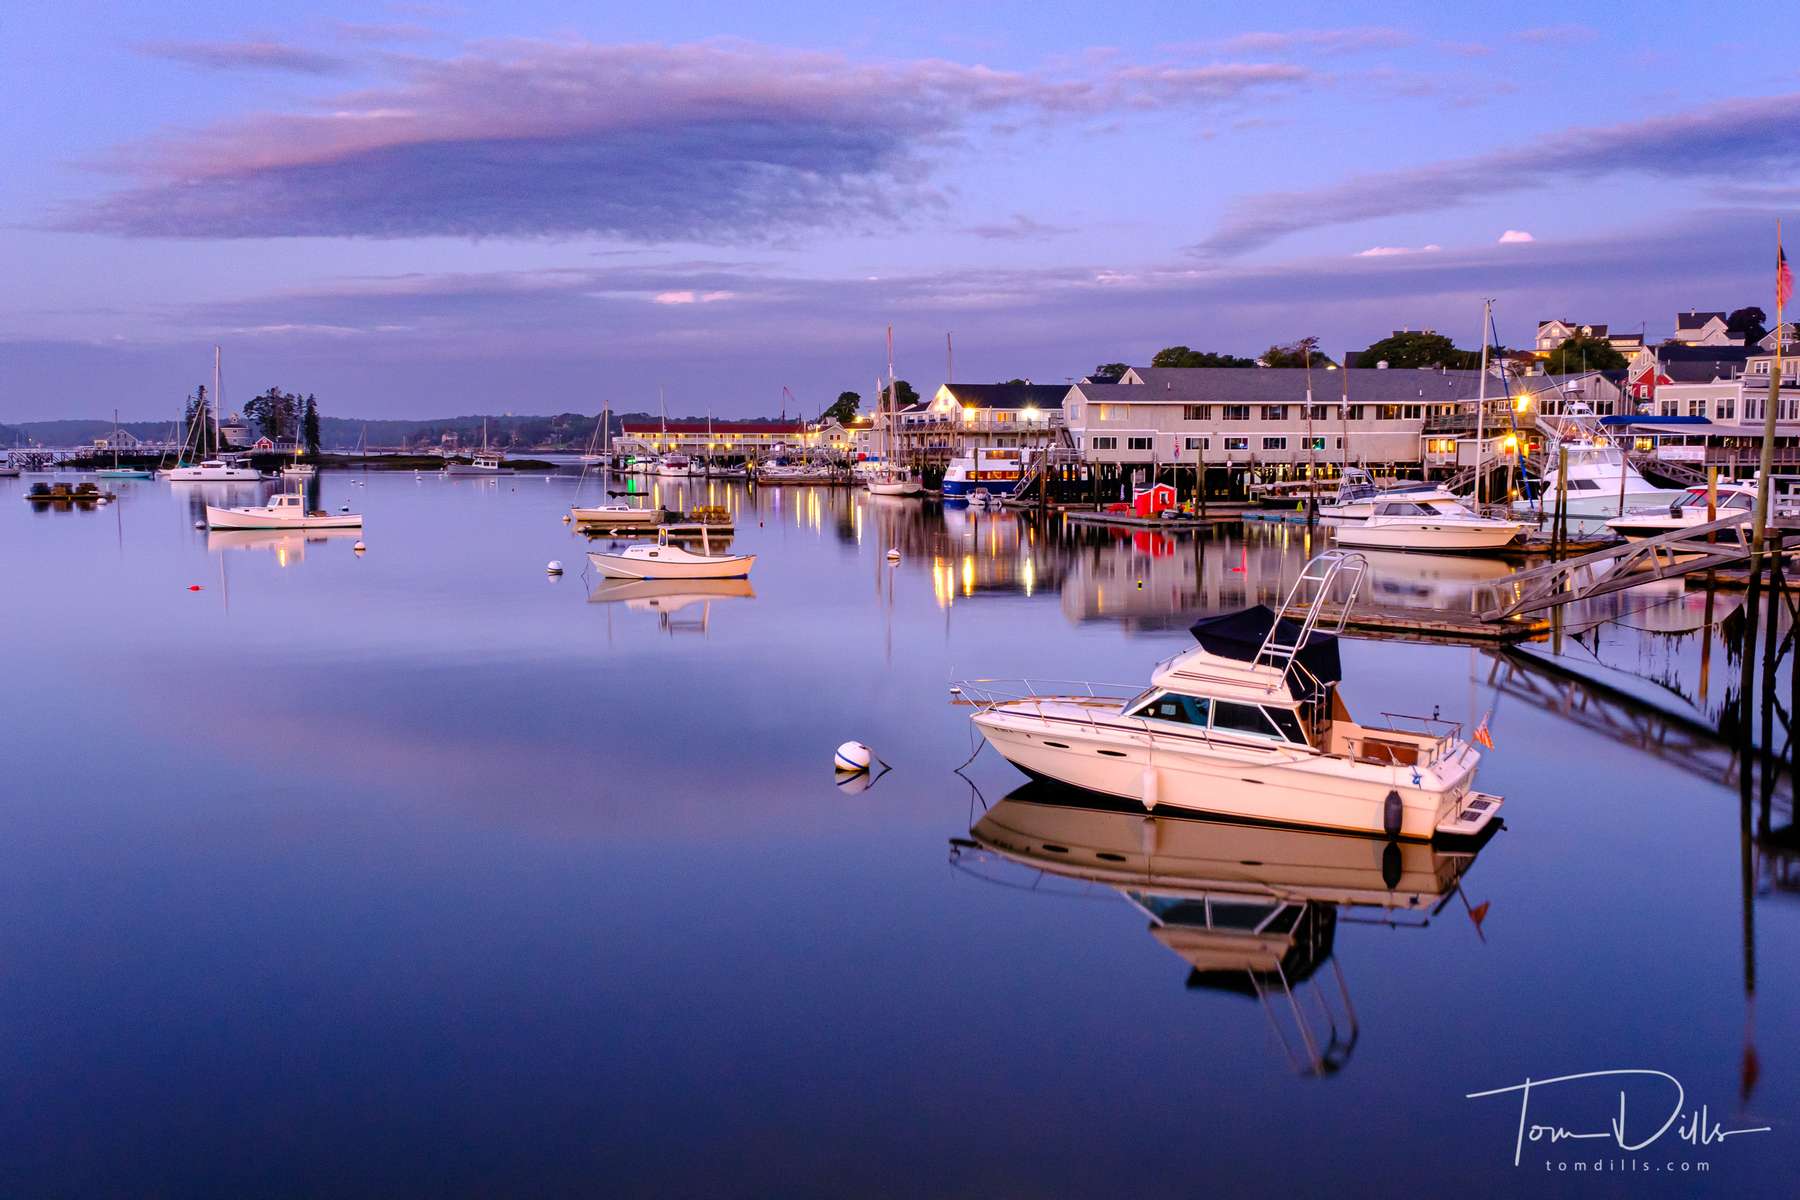 Early morning in Boothbay Harbor, Maine